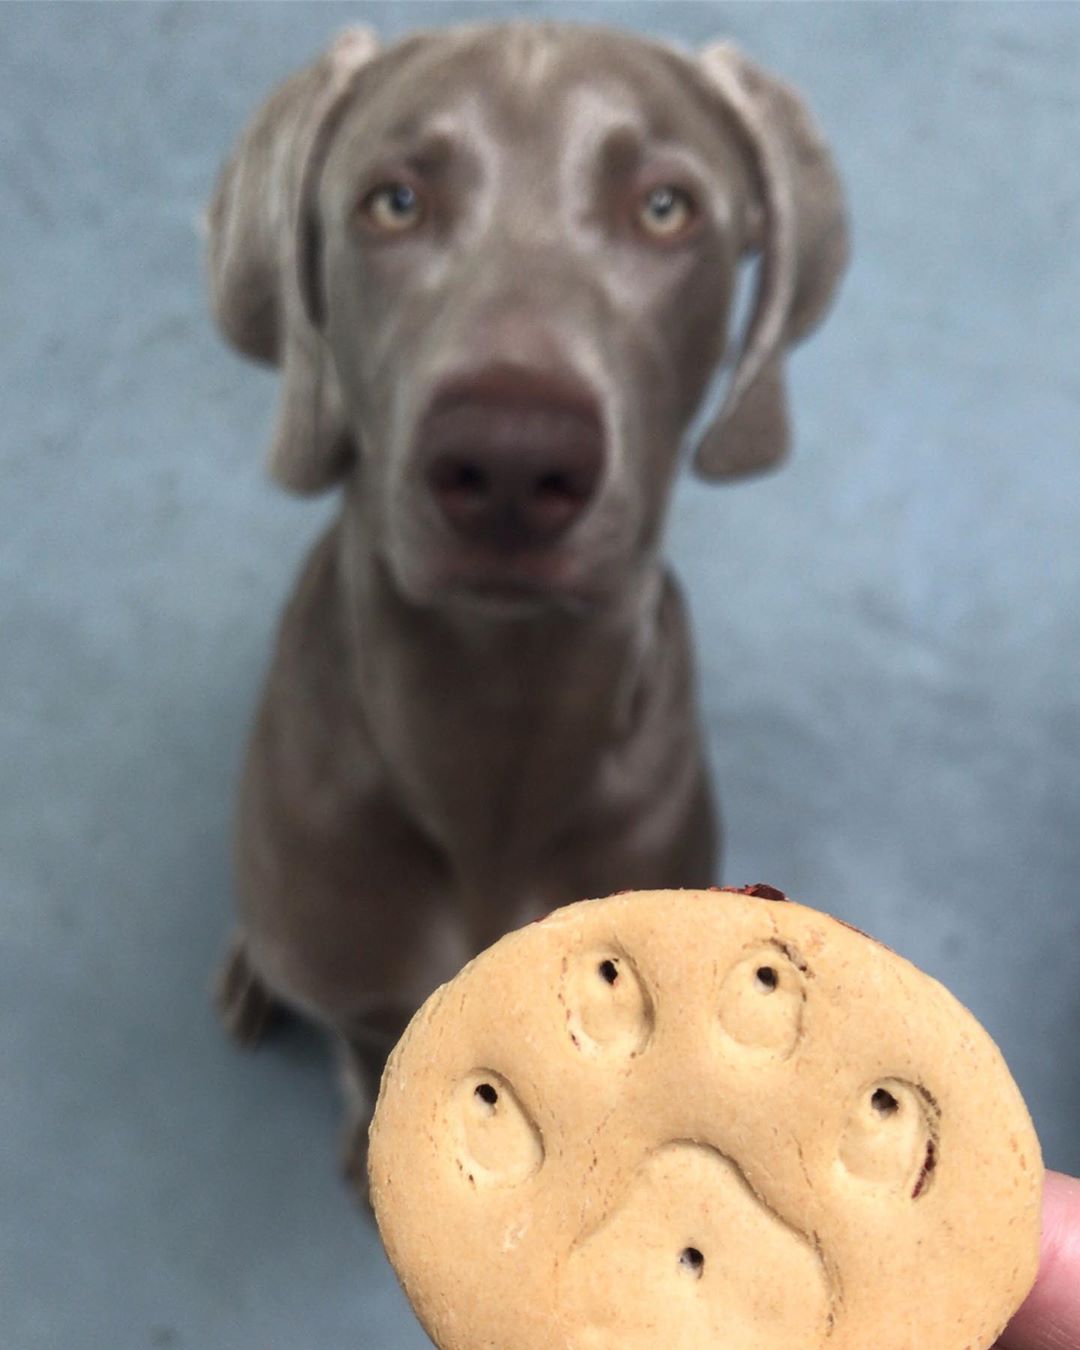 A Weimaraner sitting on the floor with its begging face behind the treat in the hand of a person